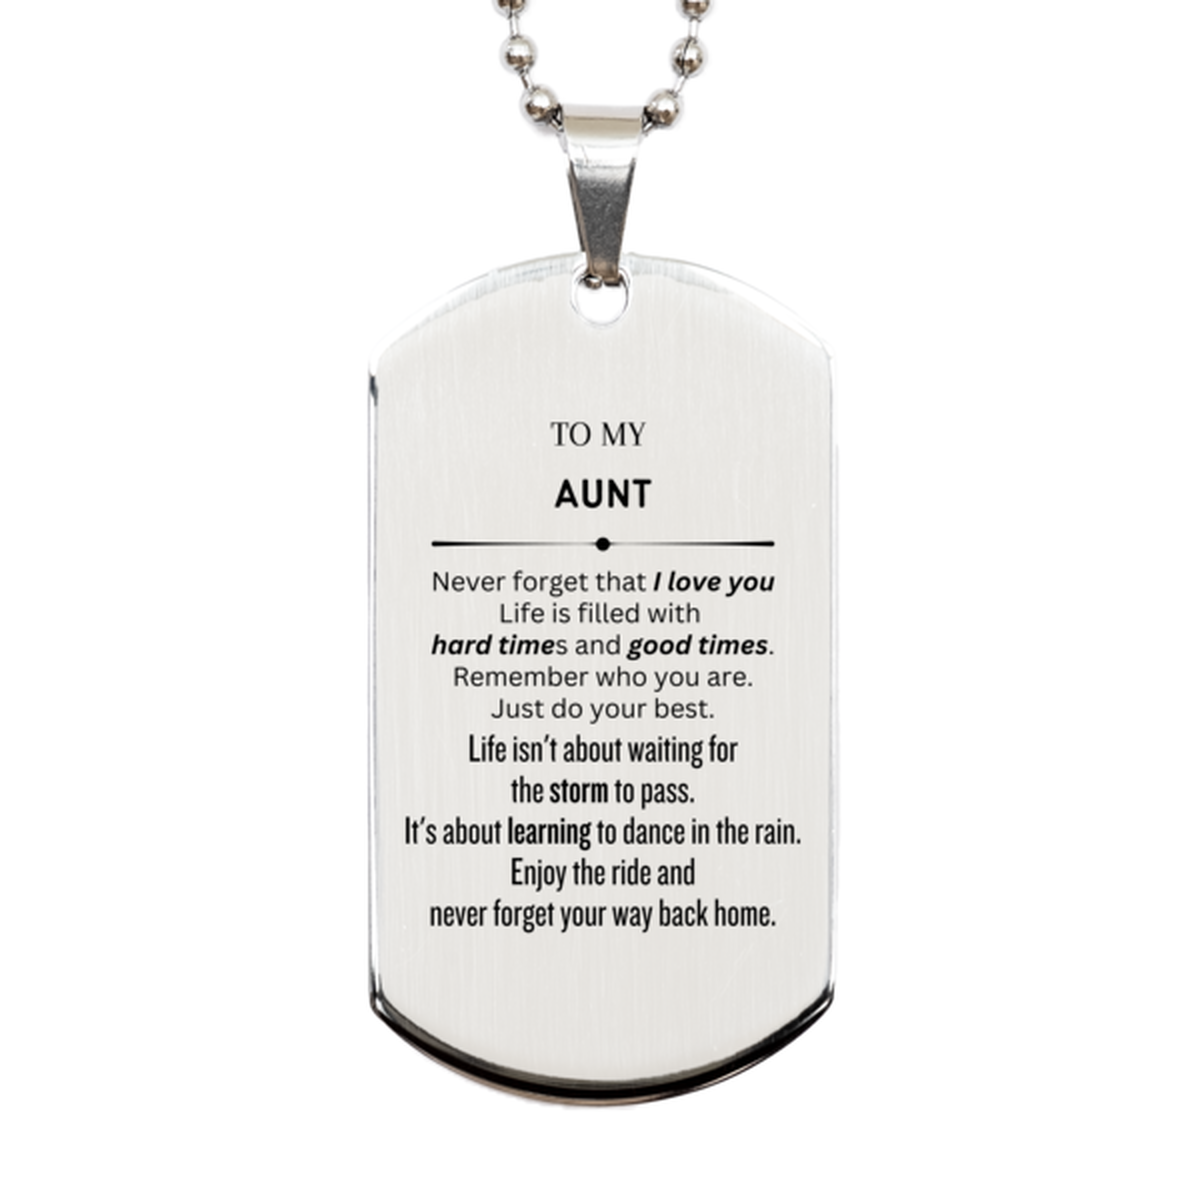 Christmas Aunt Silver Dog Tag Gifts, To My Aunt Birthday Thank You Gifts For Aunt, Graduation Unique Gifts For Aunt To My Aunt Never forget that I love you life is filled with hard times and good times. Remember who you are. Just do your best